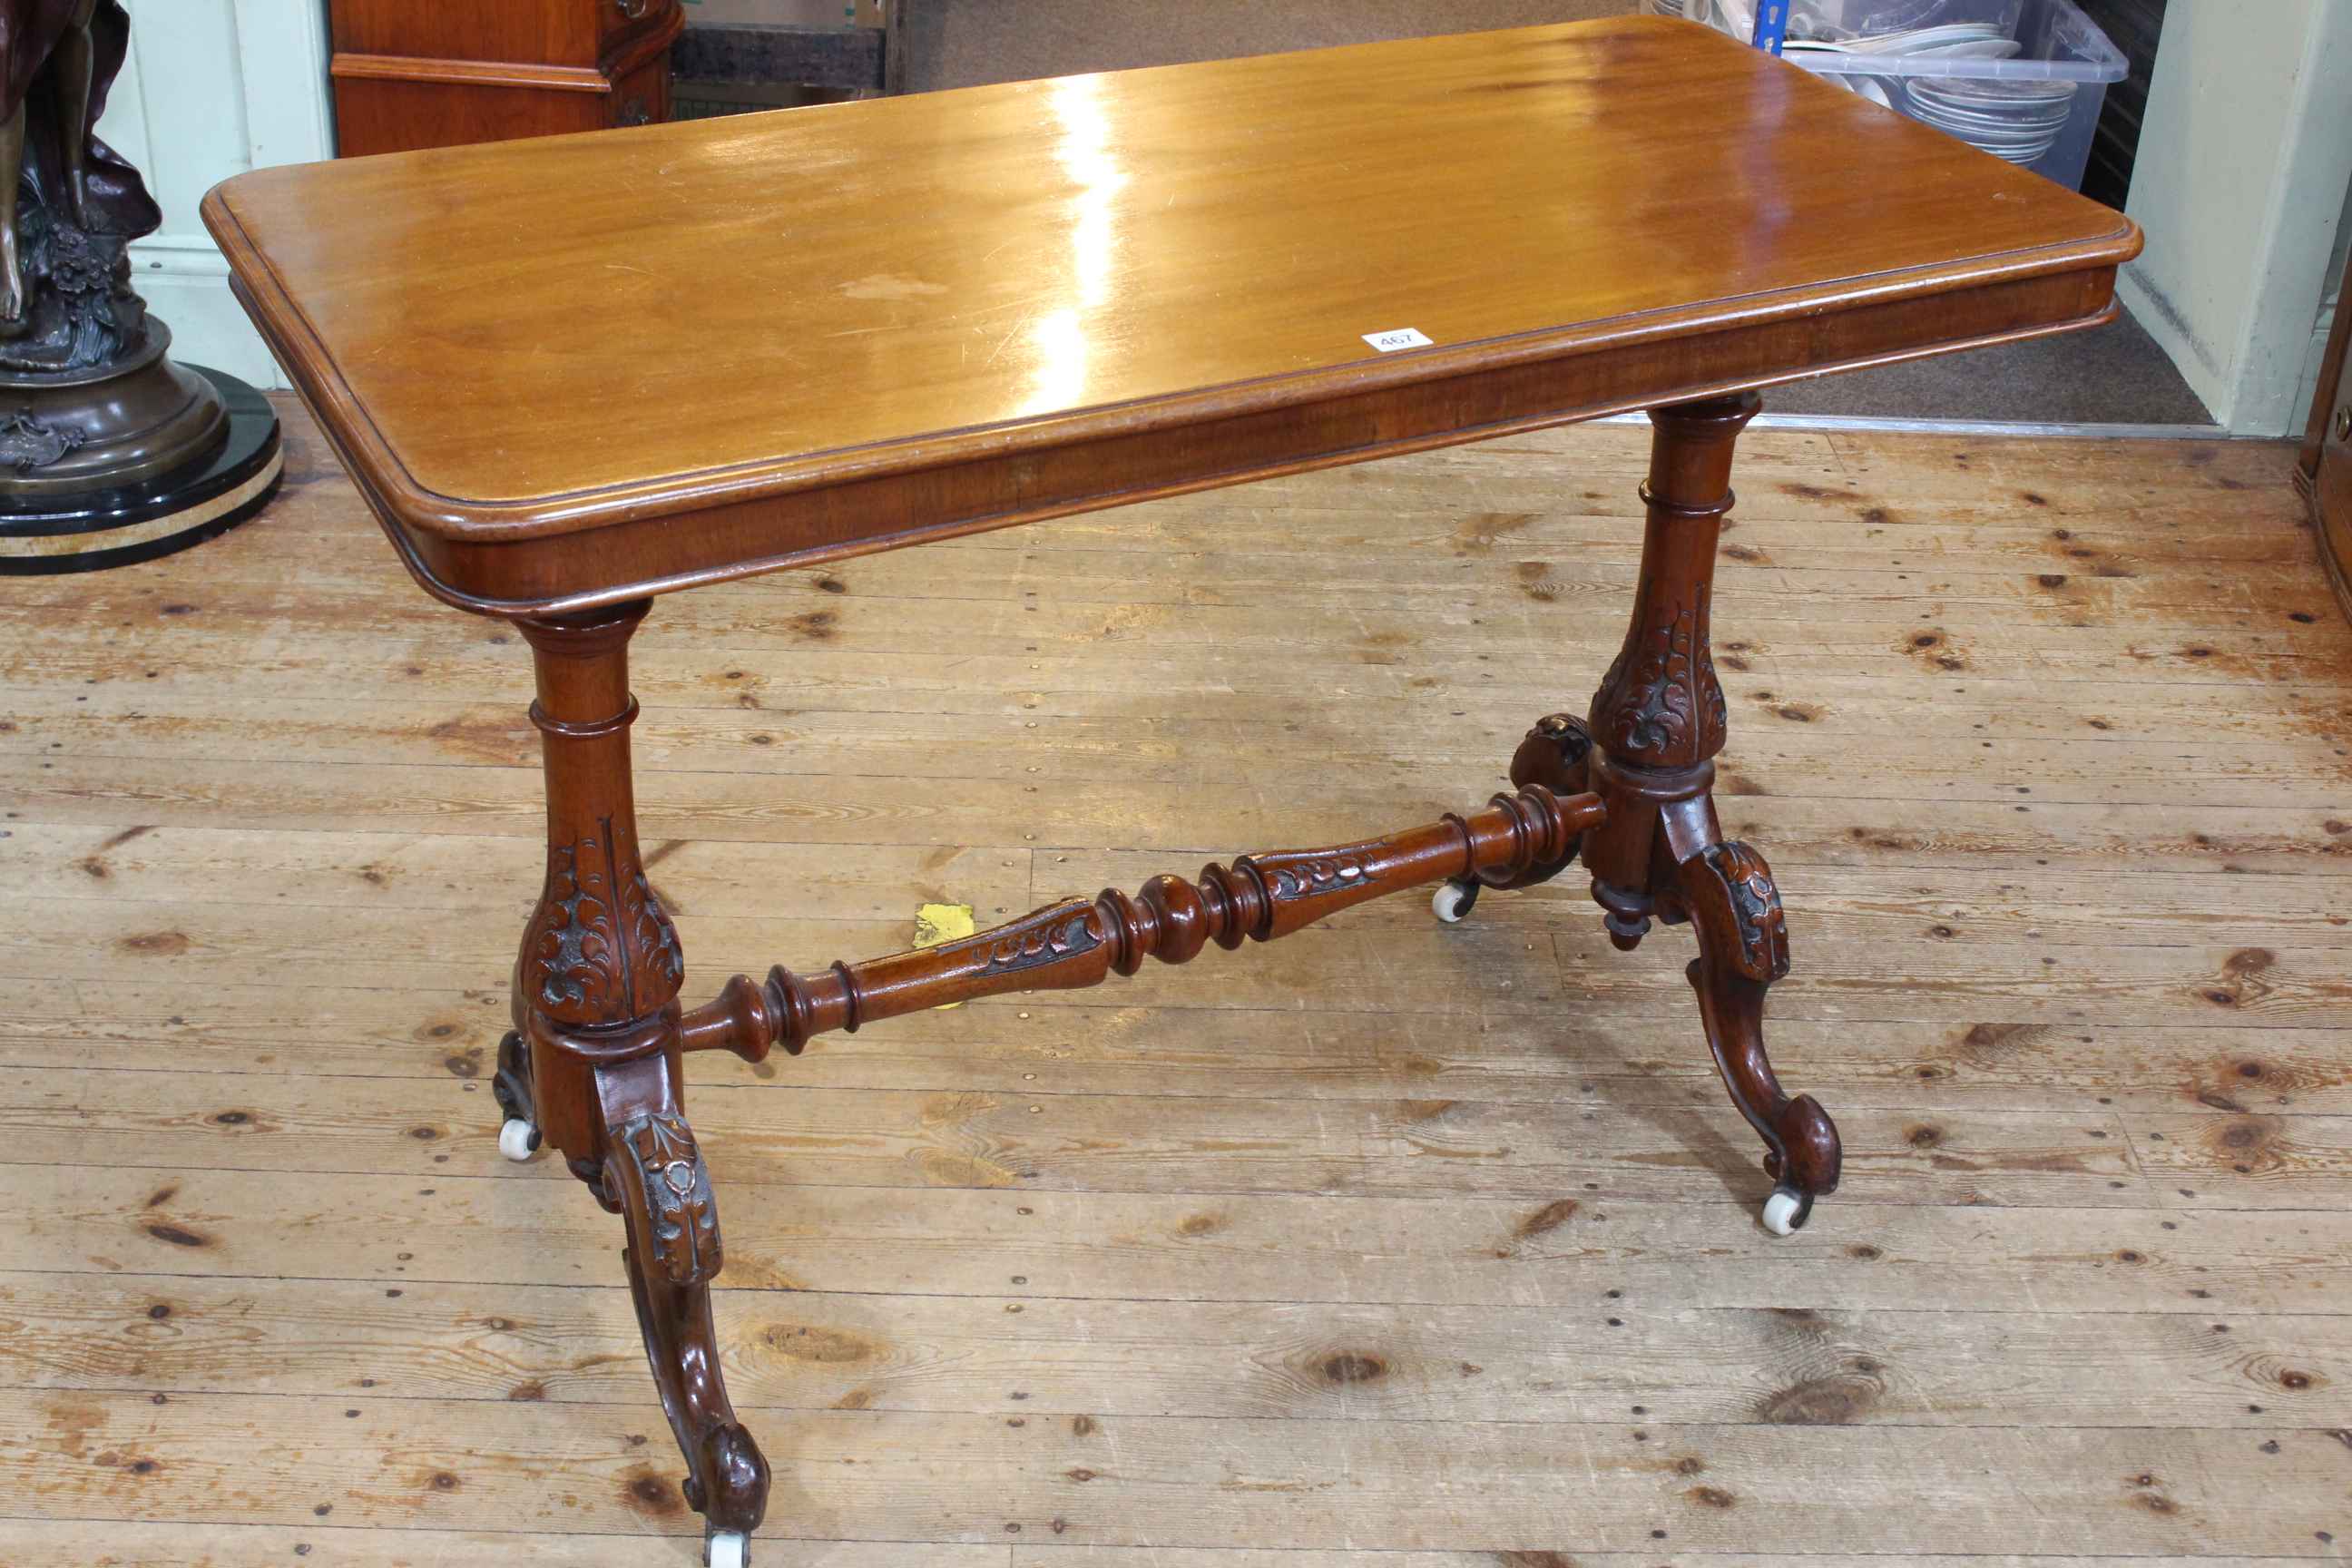 Victorian mahogany rectangular side table on carved turned pillars to four scrolled legs joined by